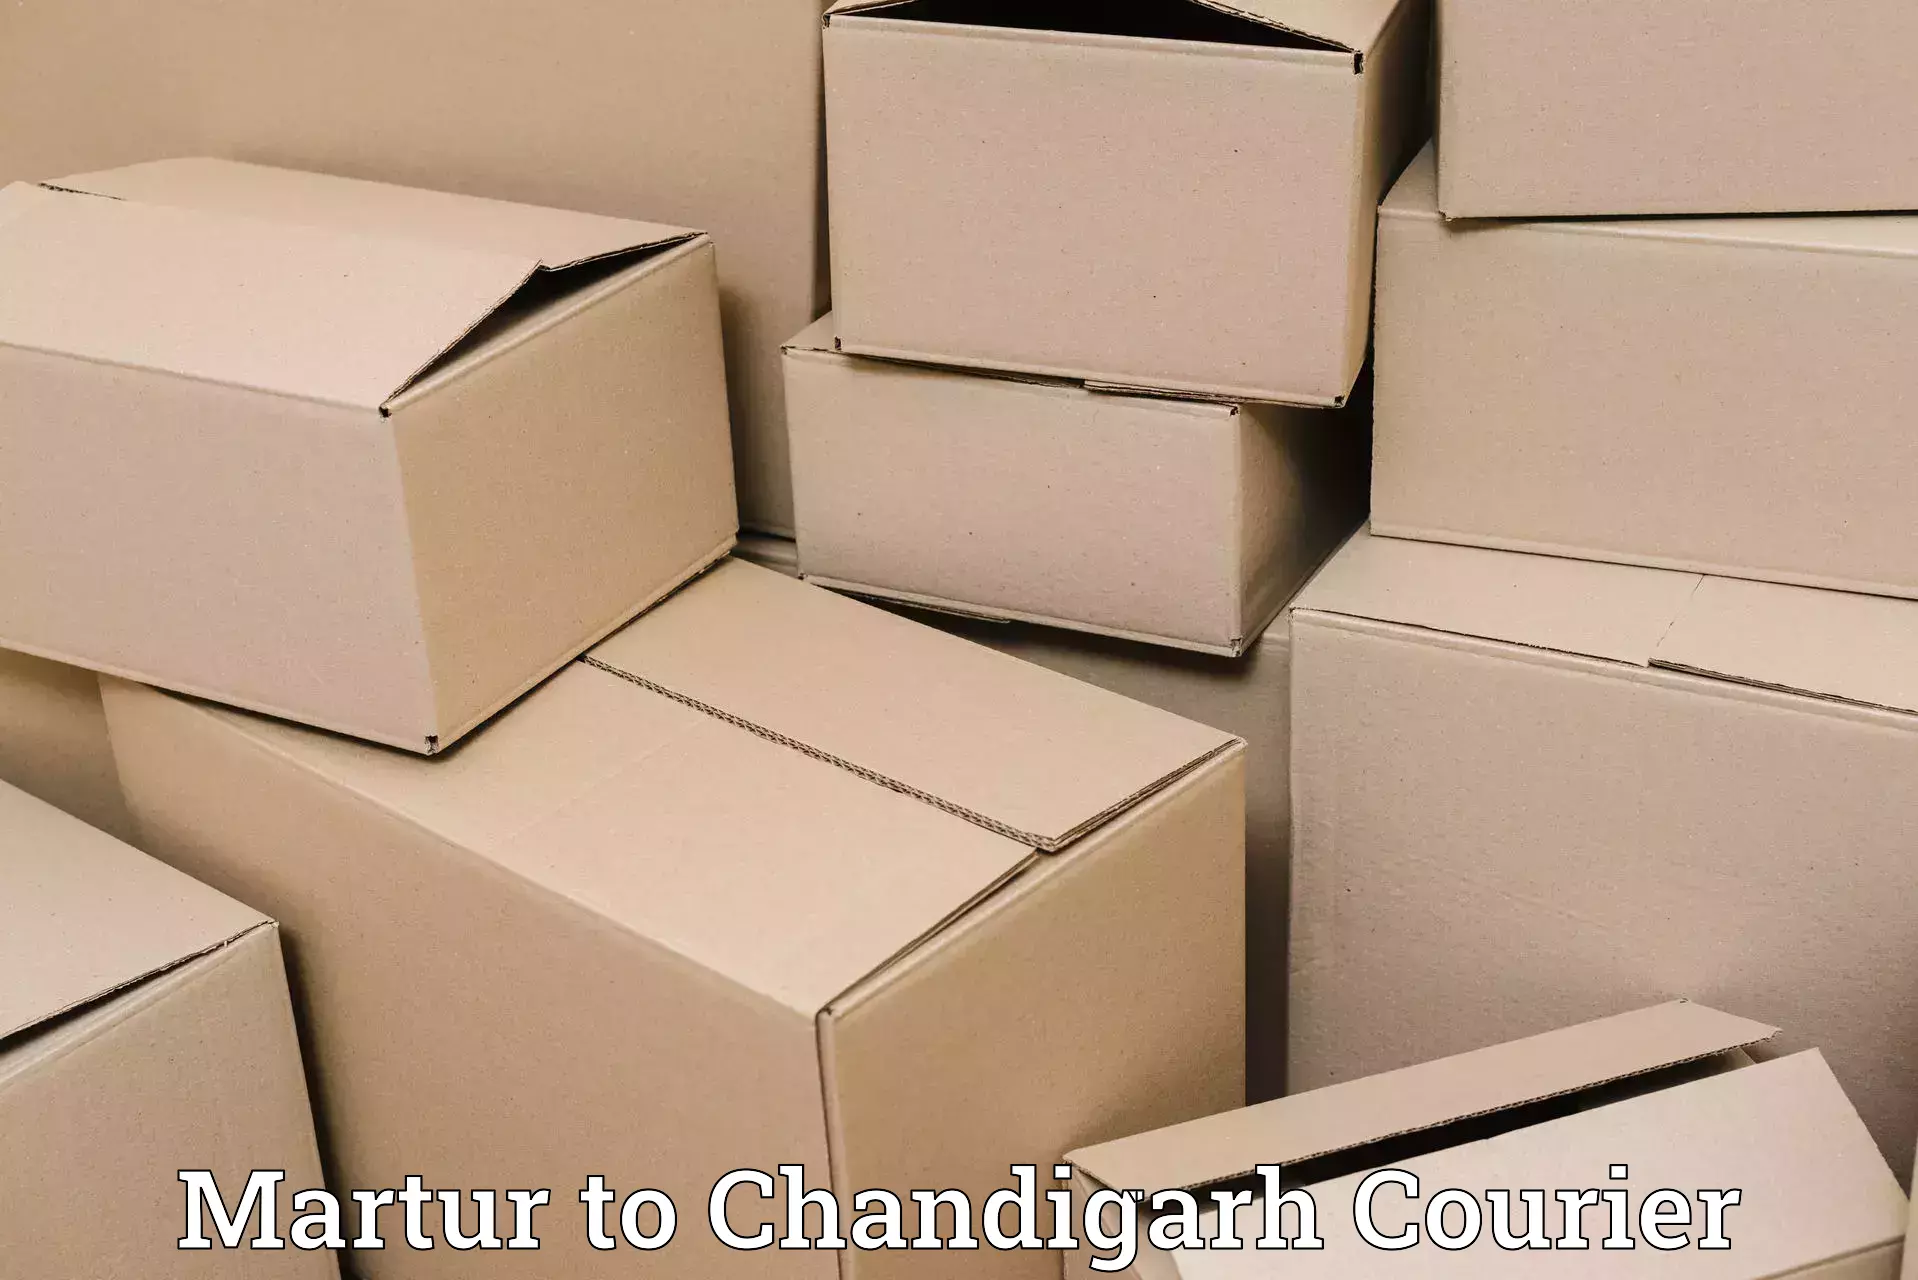 Reliable delivery network Martur to Chandigarh